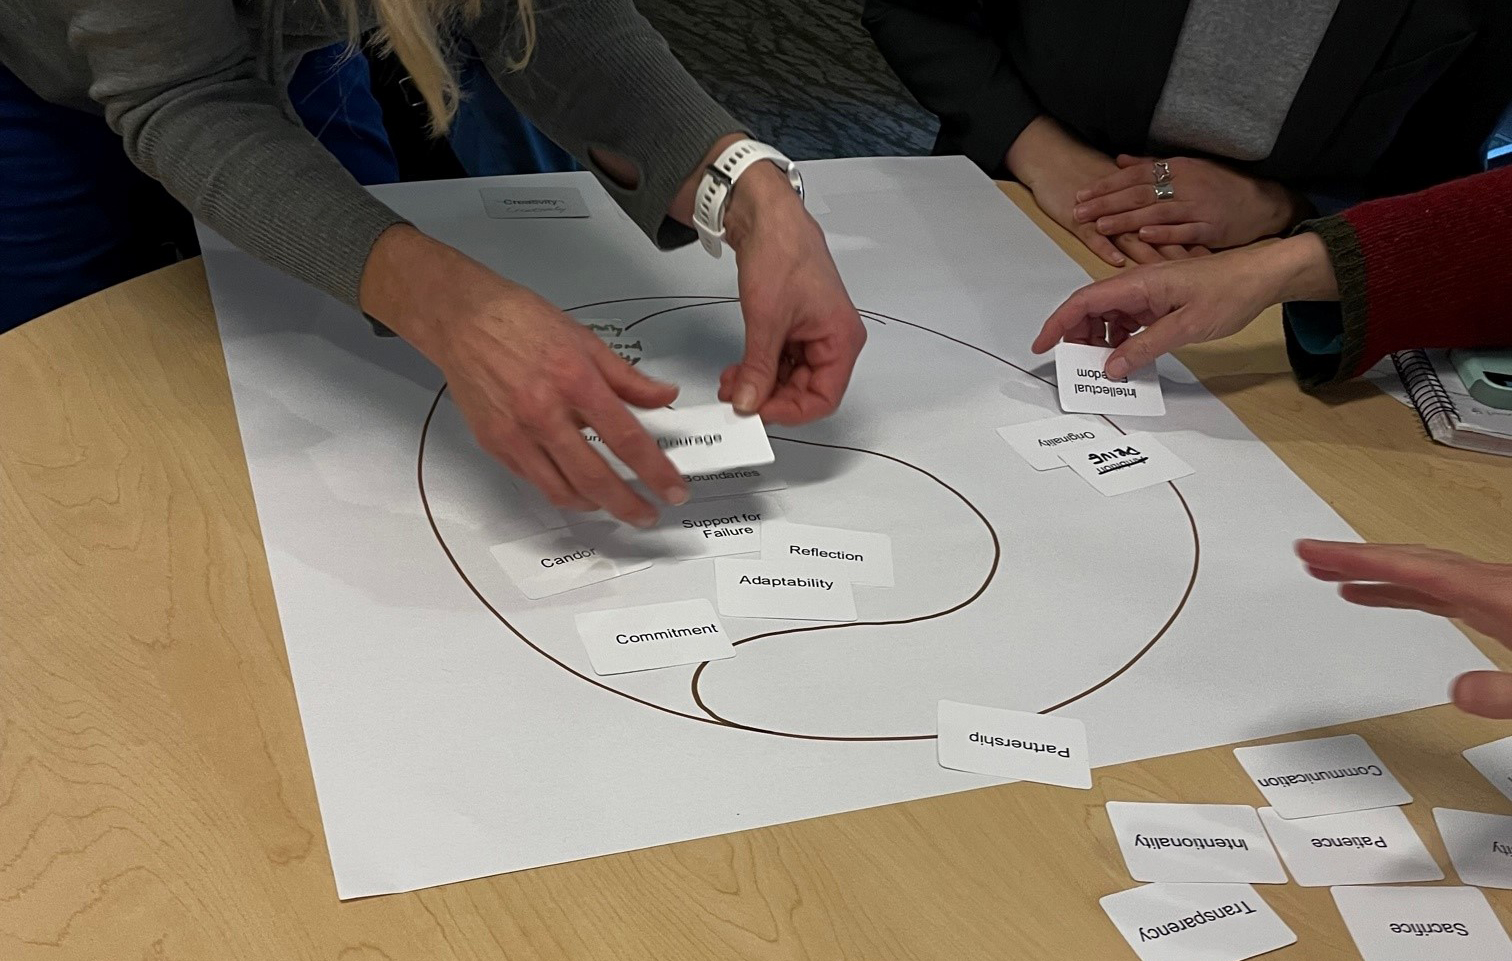 Faculty work with thematic cards during an exercise with Humetrics at the UW.